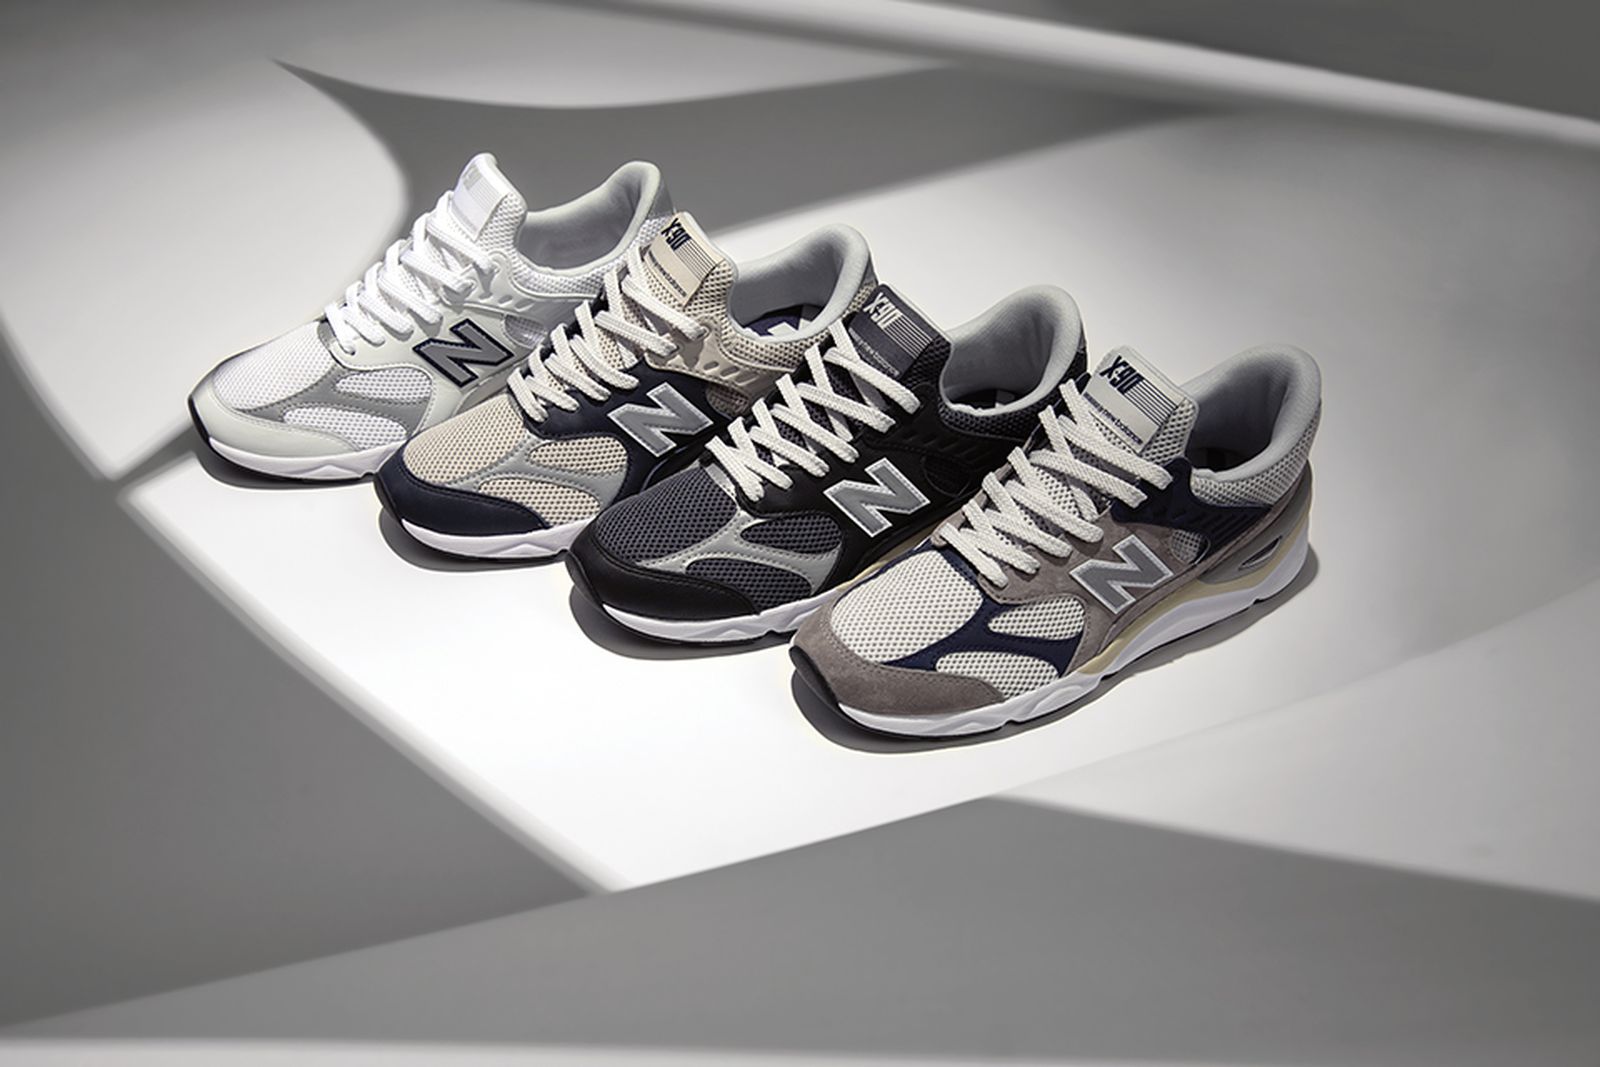 New Balance X-90 Pack: Date More Info